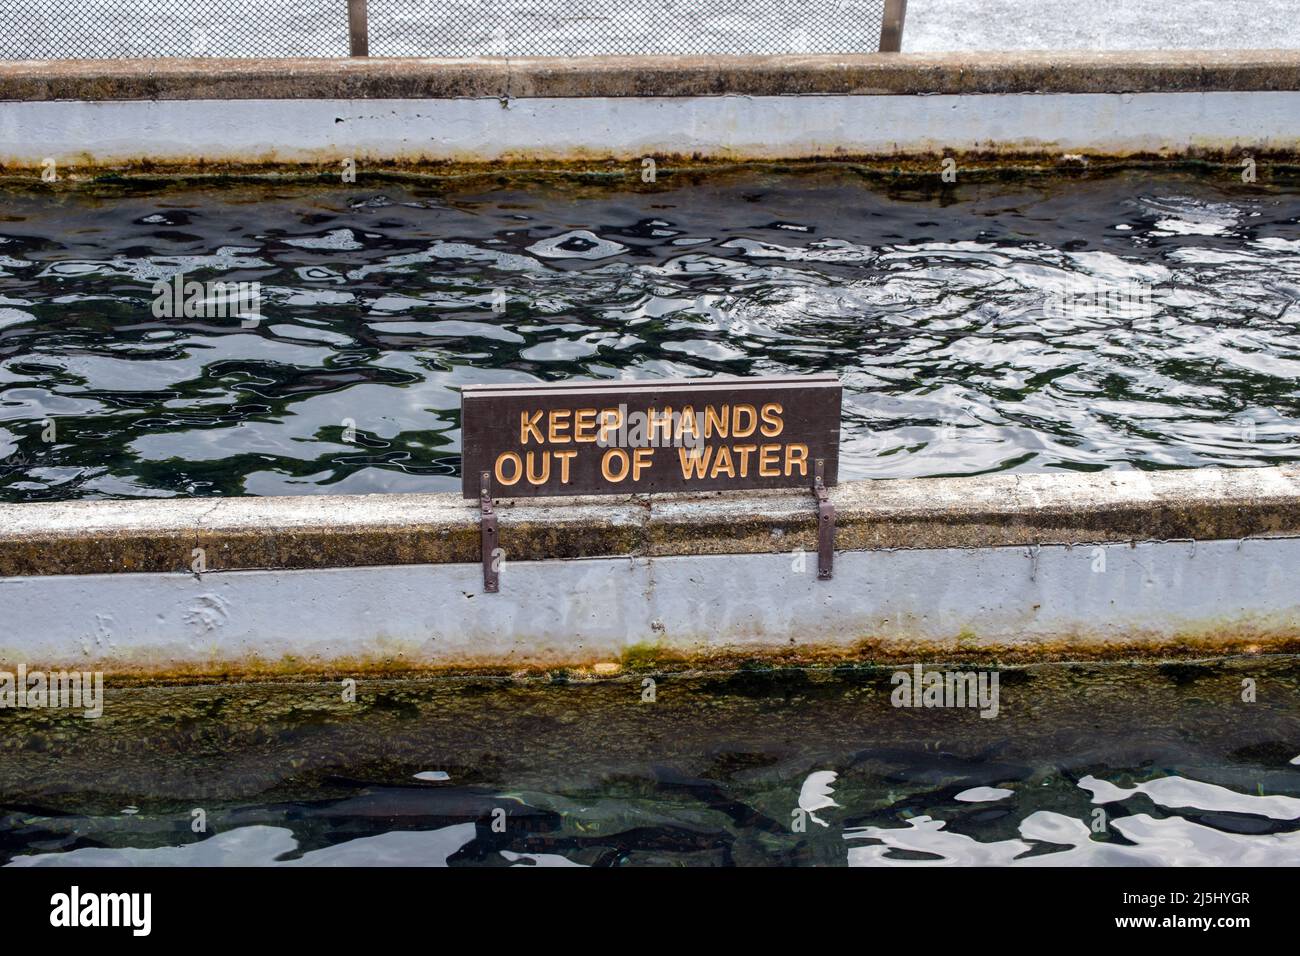 The sign makes the warning clear: keep hands out of water. Stock Photo